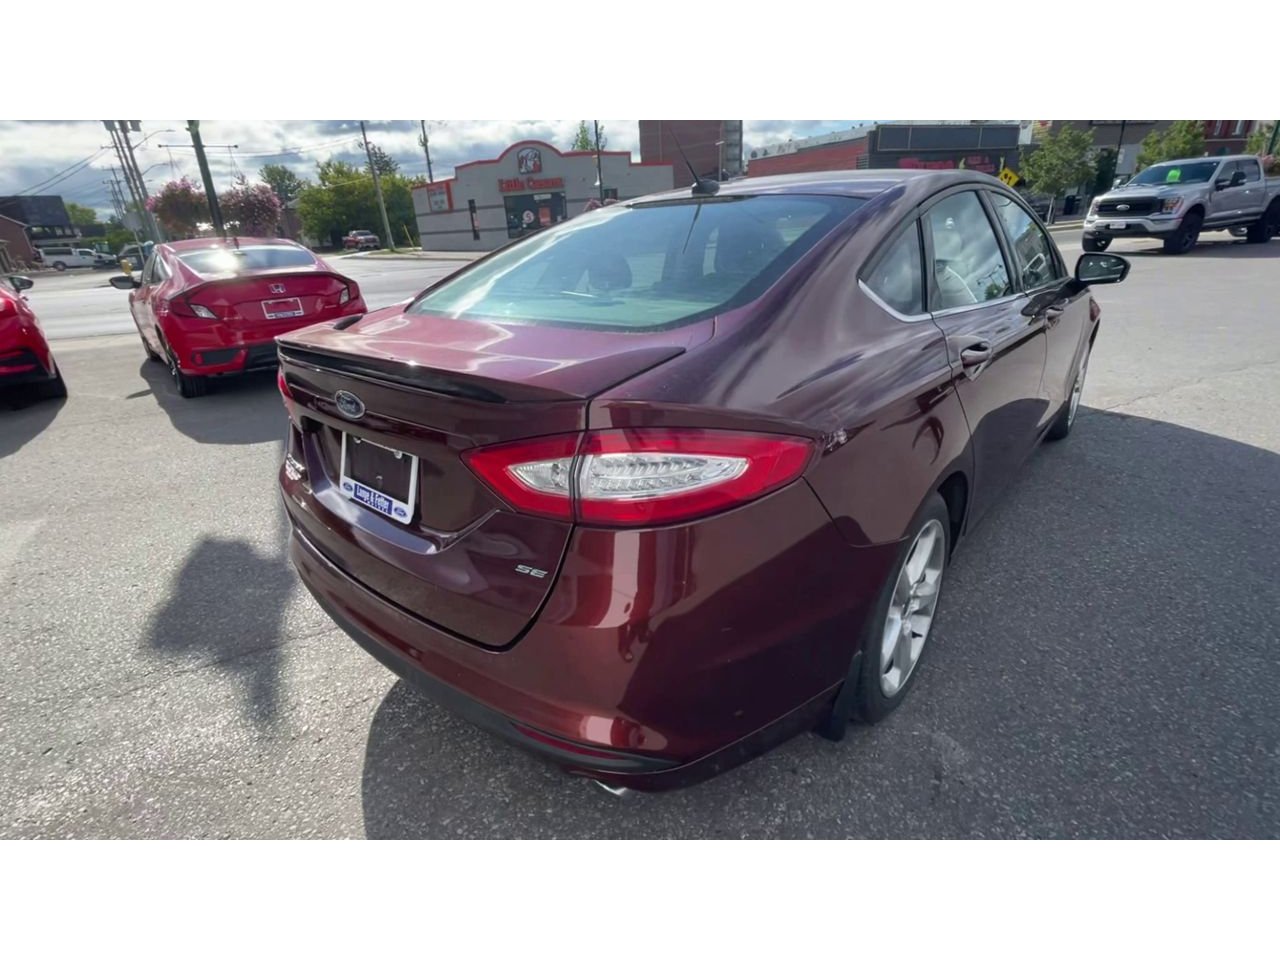 2016 Ford Fusion - P21337 Full Image 8